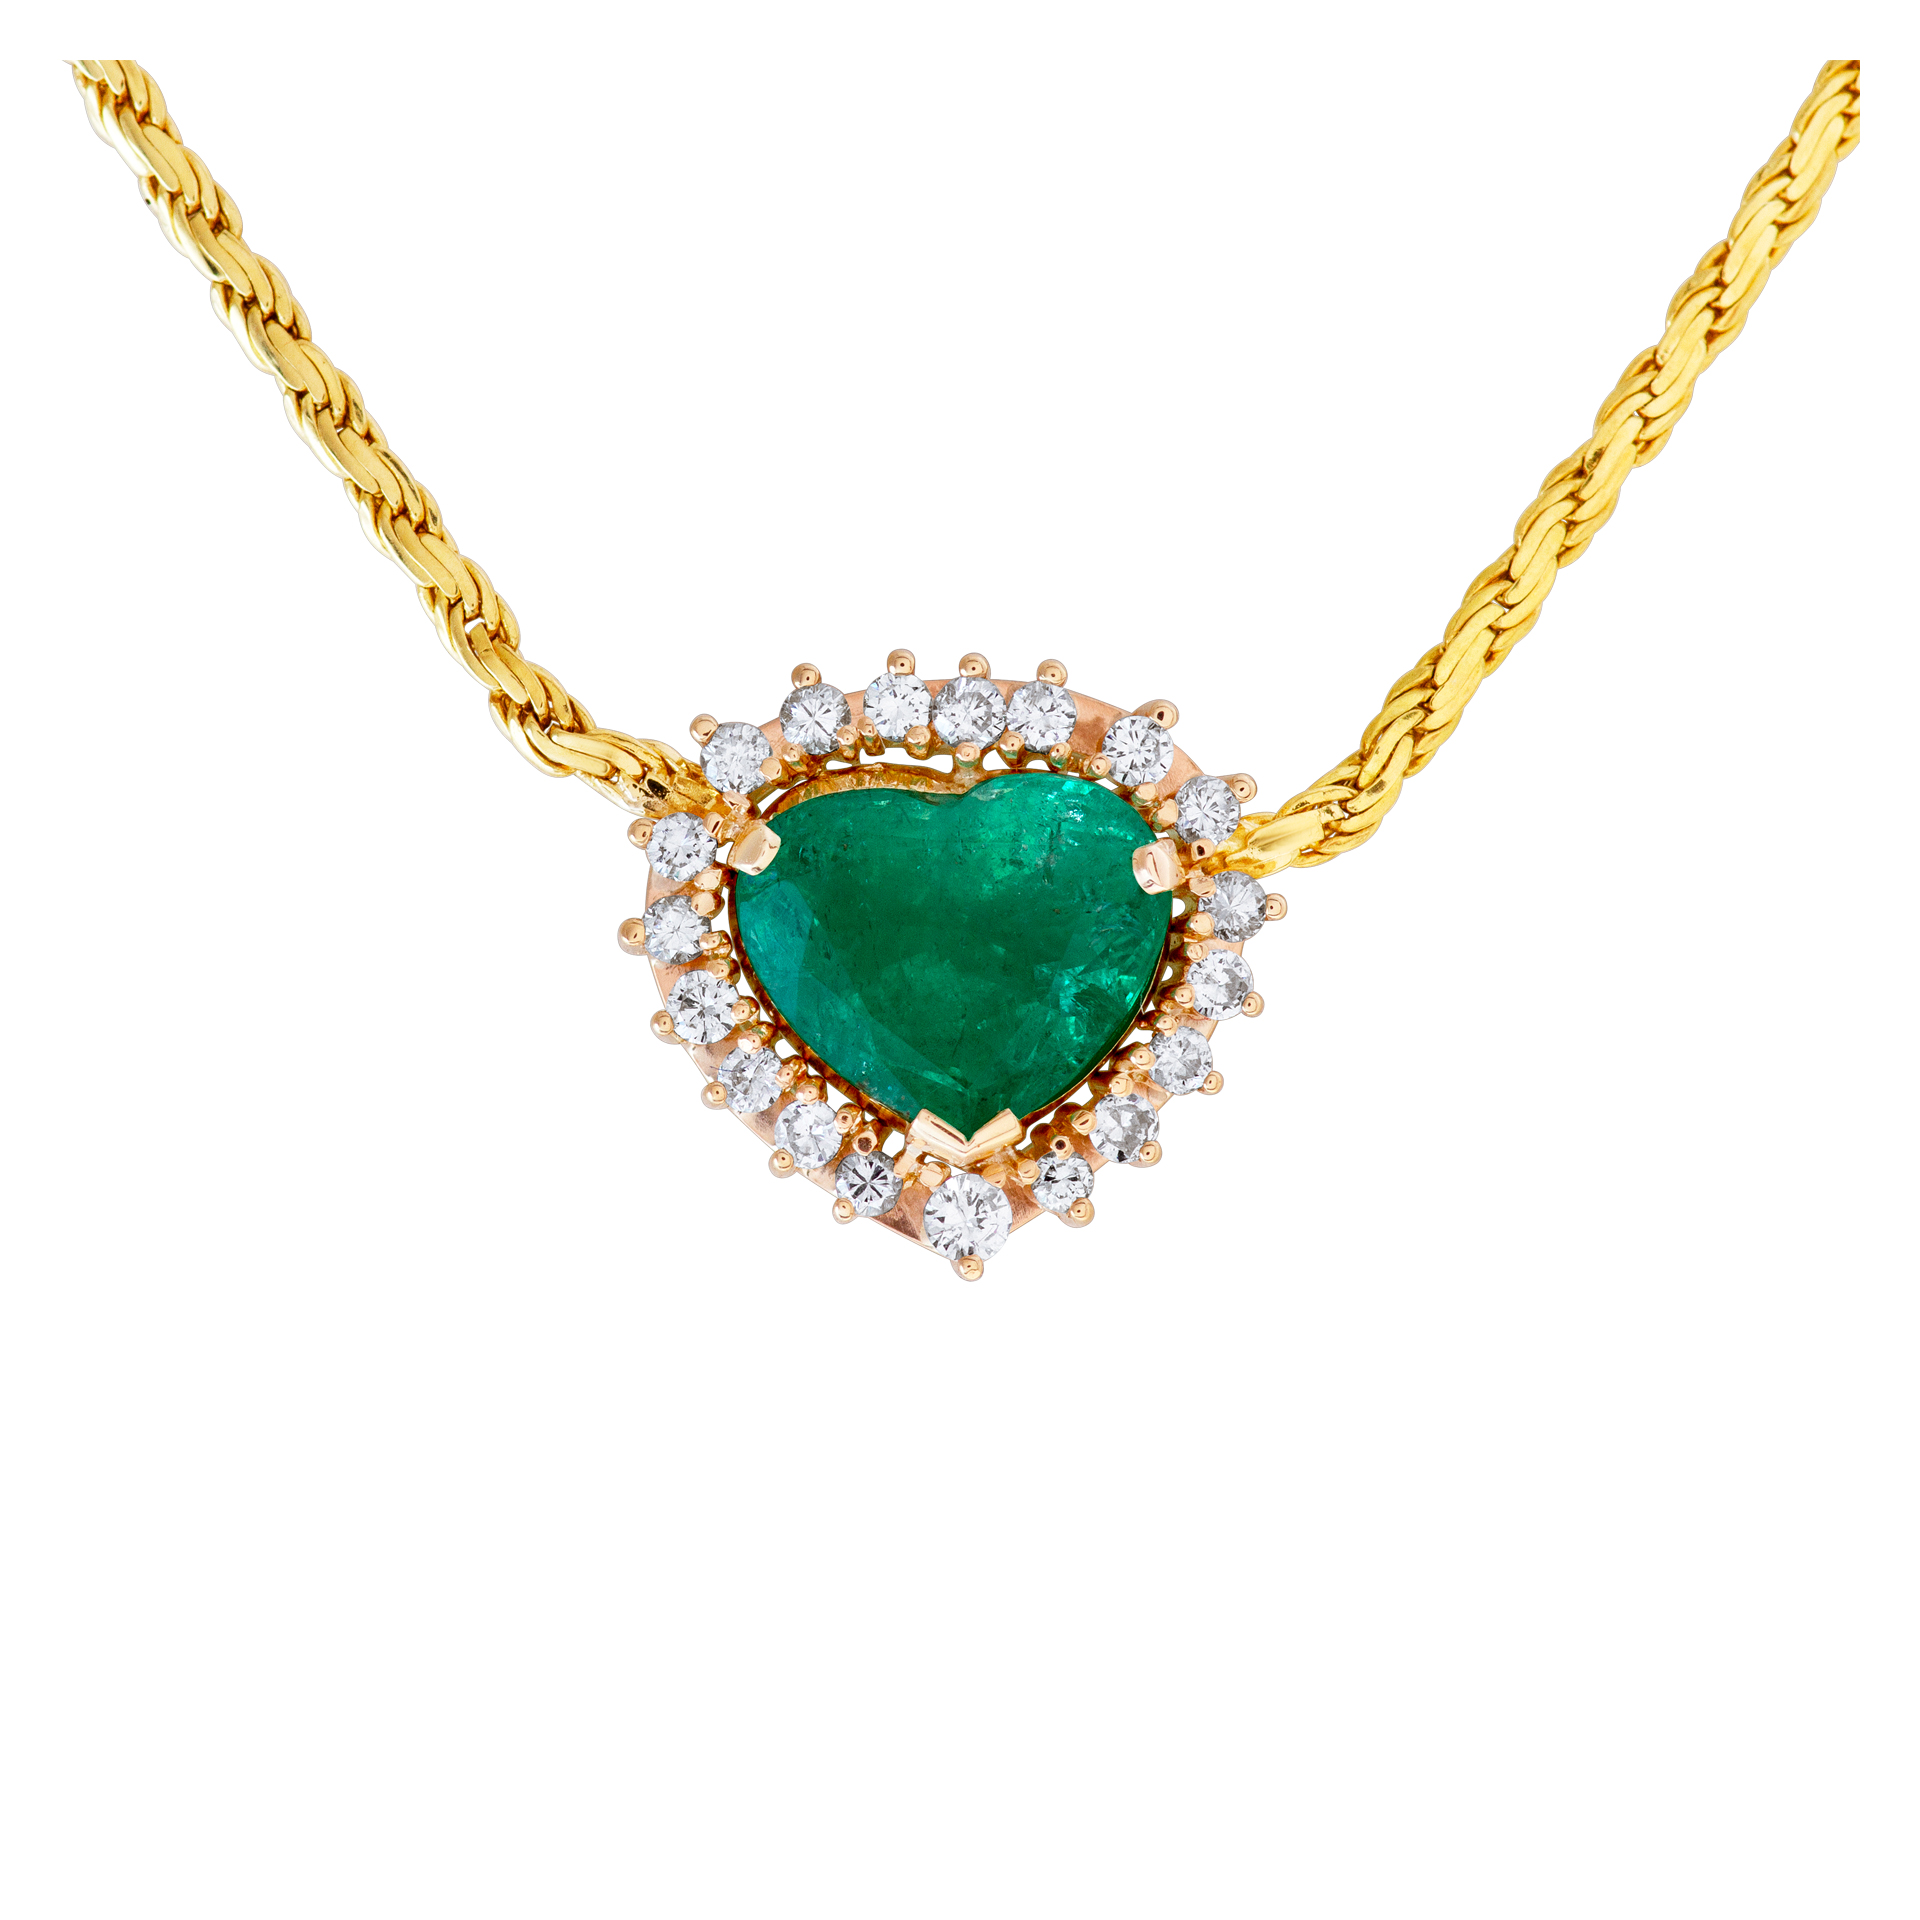 Heart shape 3.01 carat Colombian emerald and diamond necklace